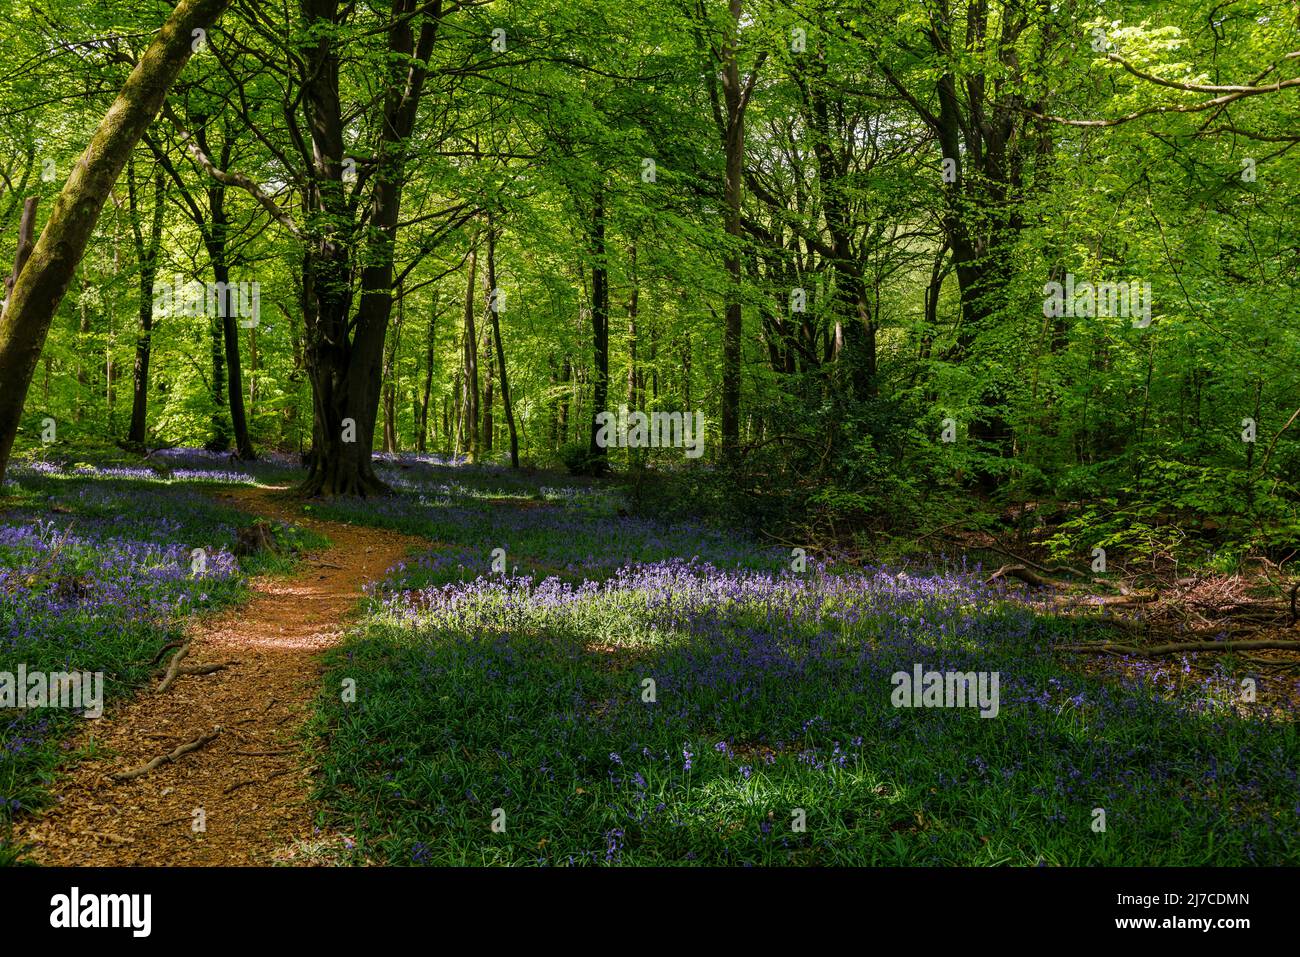 English bluebells (Hyacinthoides non-scripta) flowering in spring at White Down, Abinger Hammer in the Surrey Hills Area of outstanding Natural Beauty Stock Photo